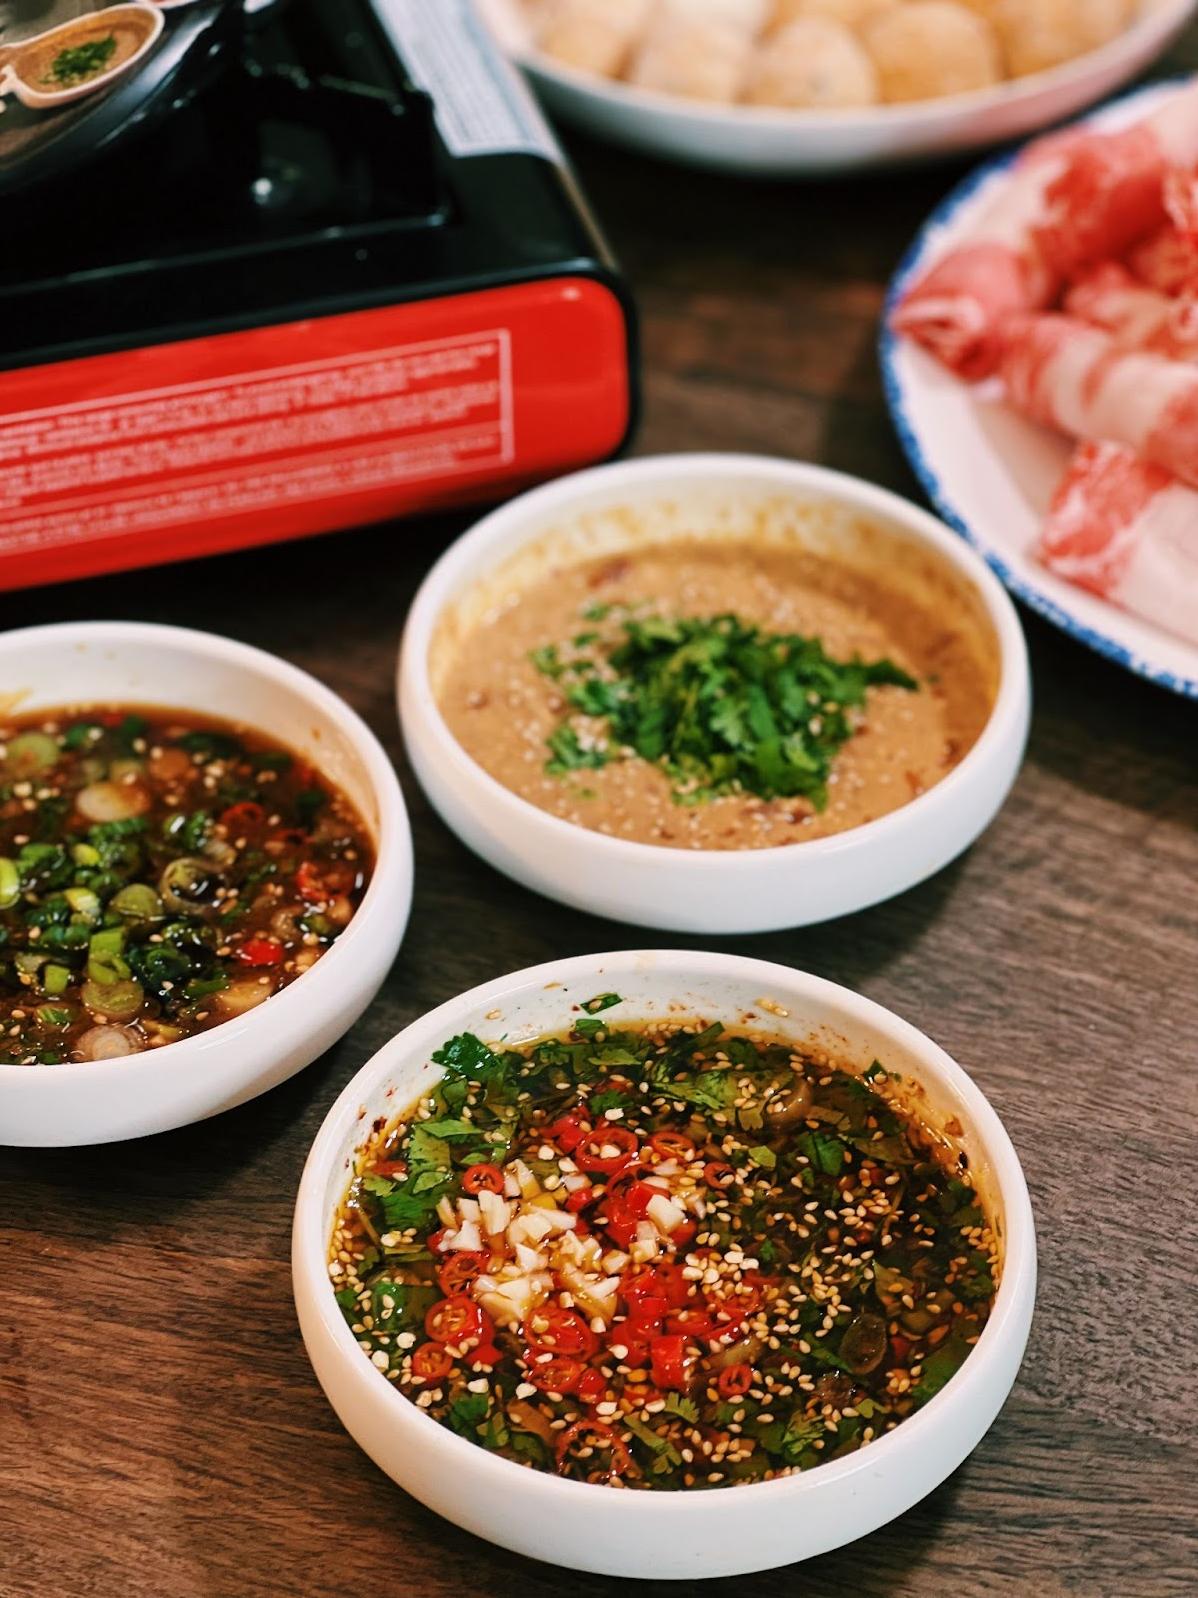 Spice Up Your Hotpot with These Tasty Dipping Sauces